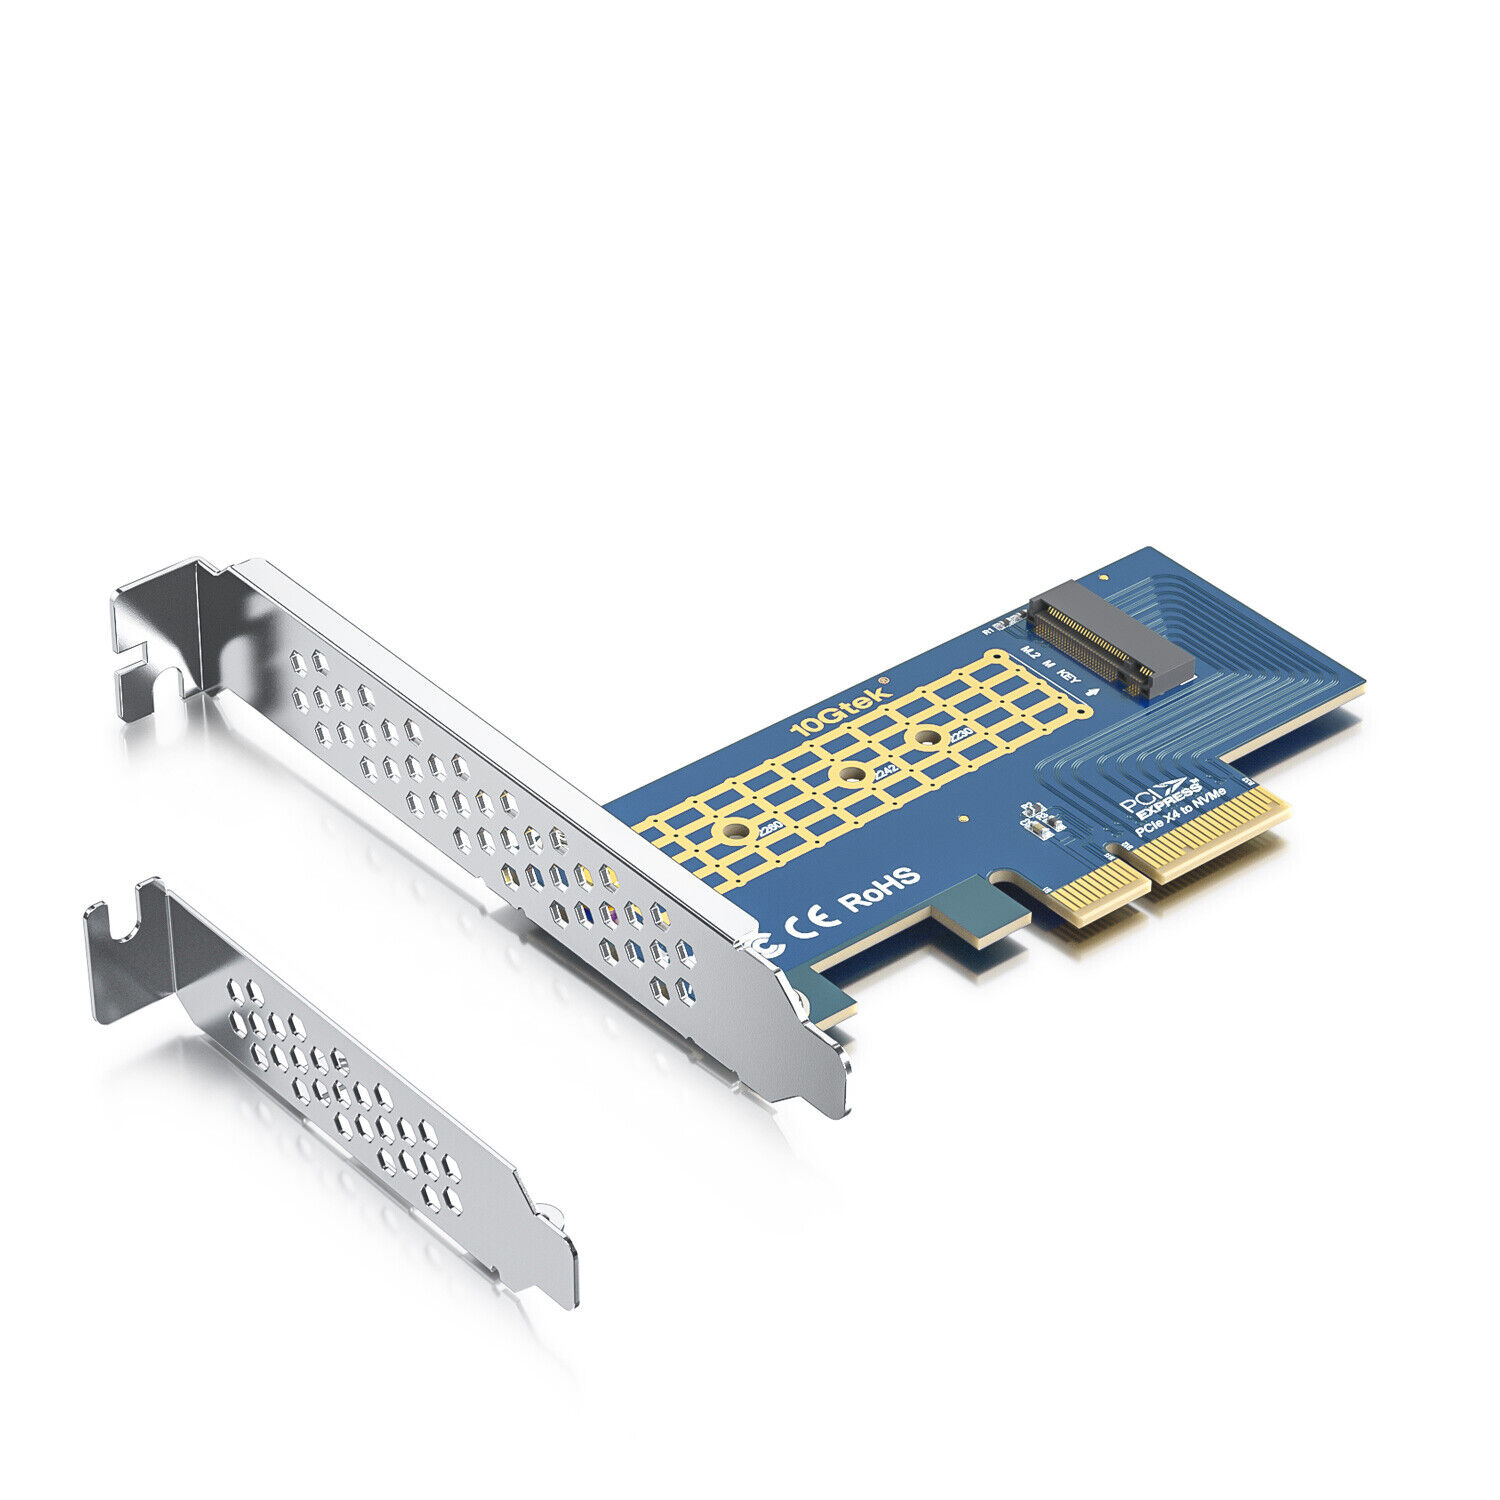 M.2 NGFF M-Key to PCIe x4 NVMe SSD Adapter Card 2230,2242,2260,and 2280 drives